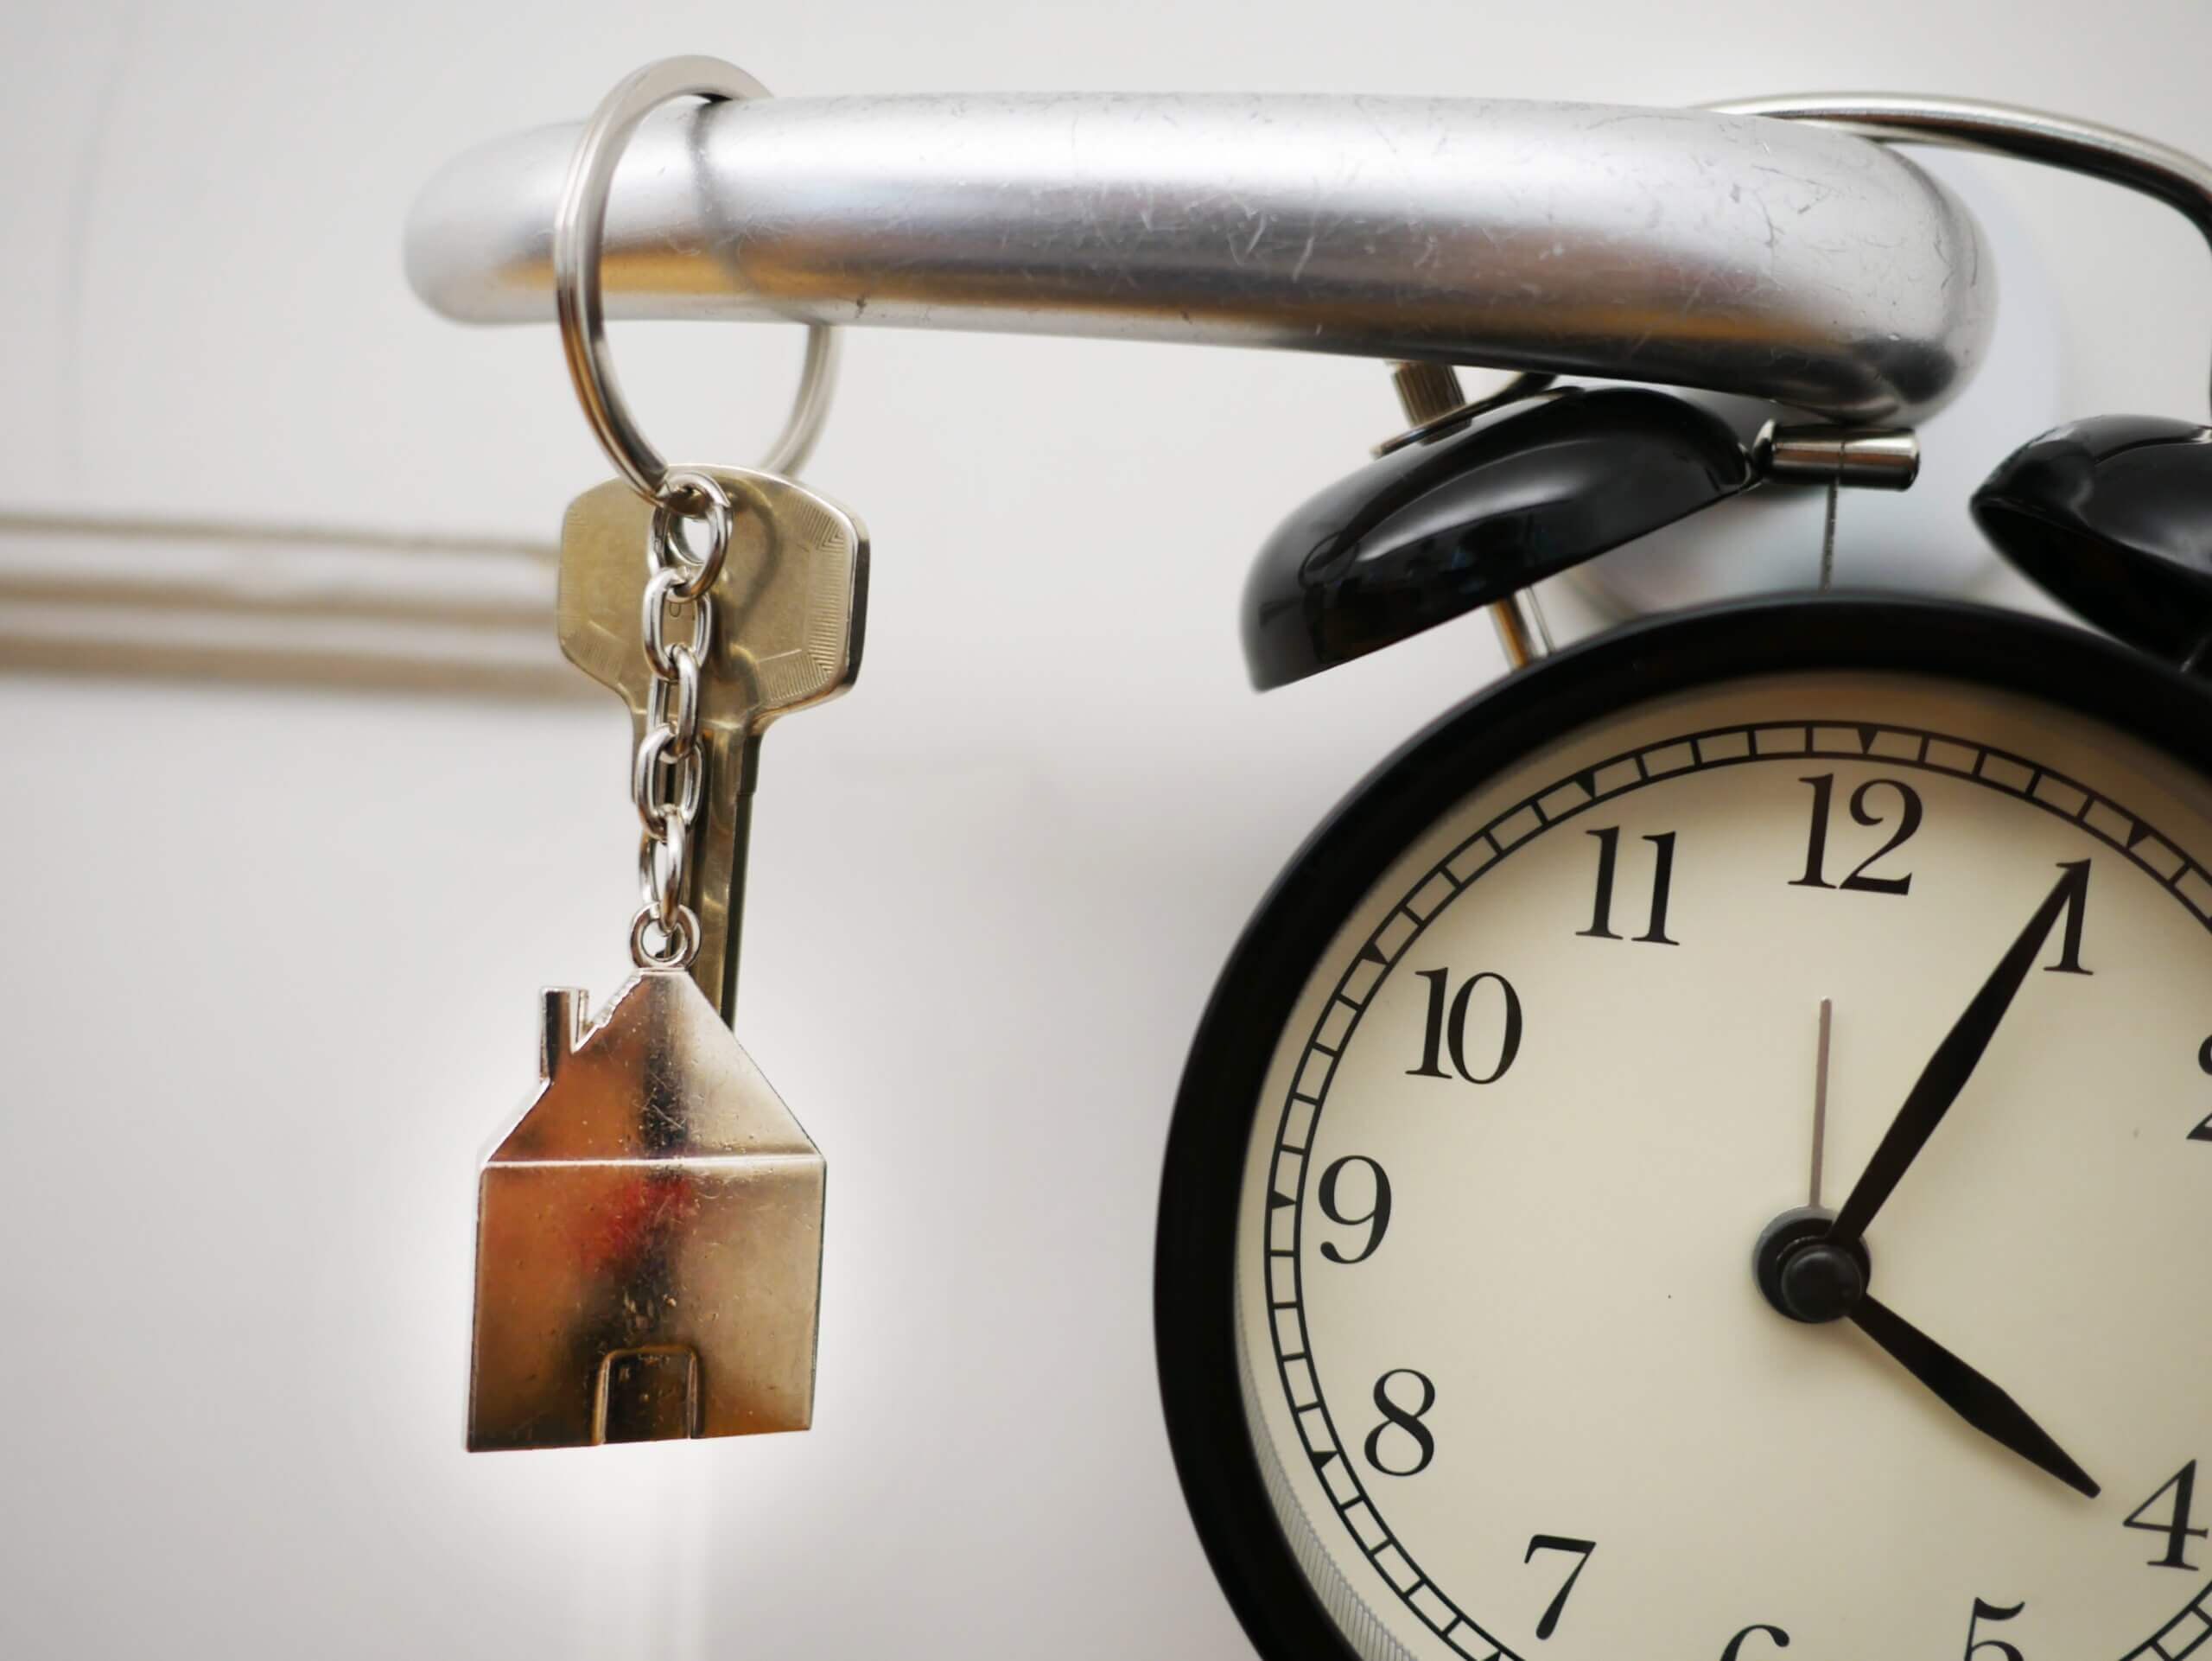 Adverse possession litigation situation where the clock is ticking on filing a claim.